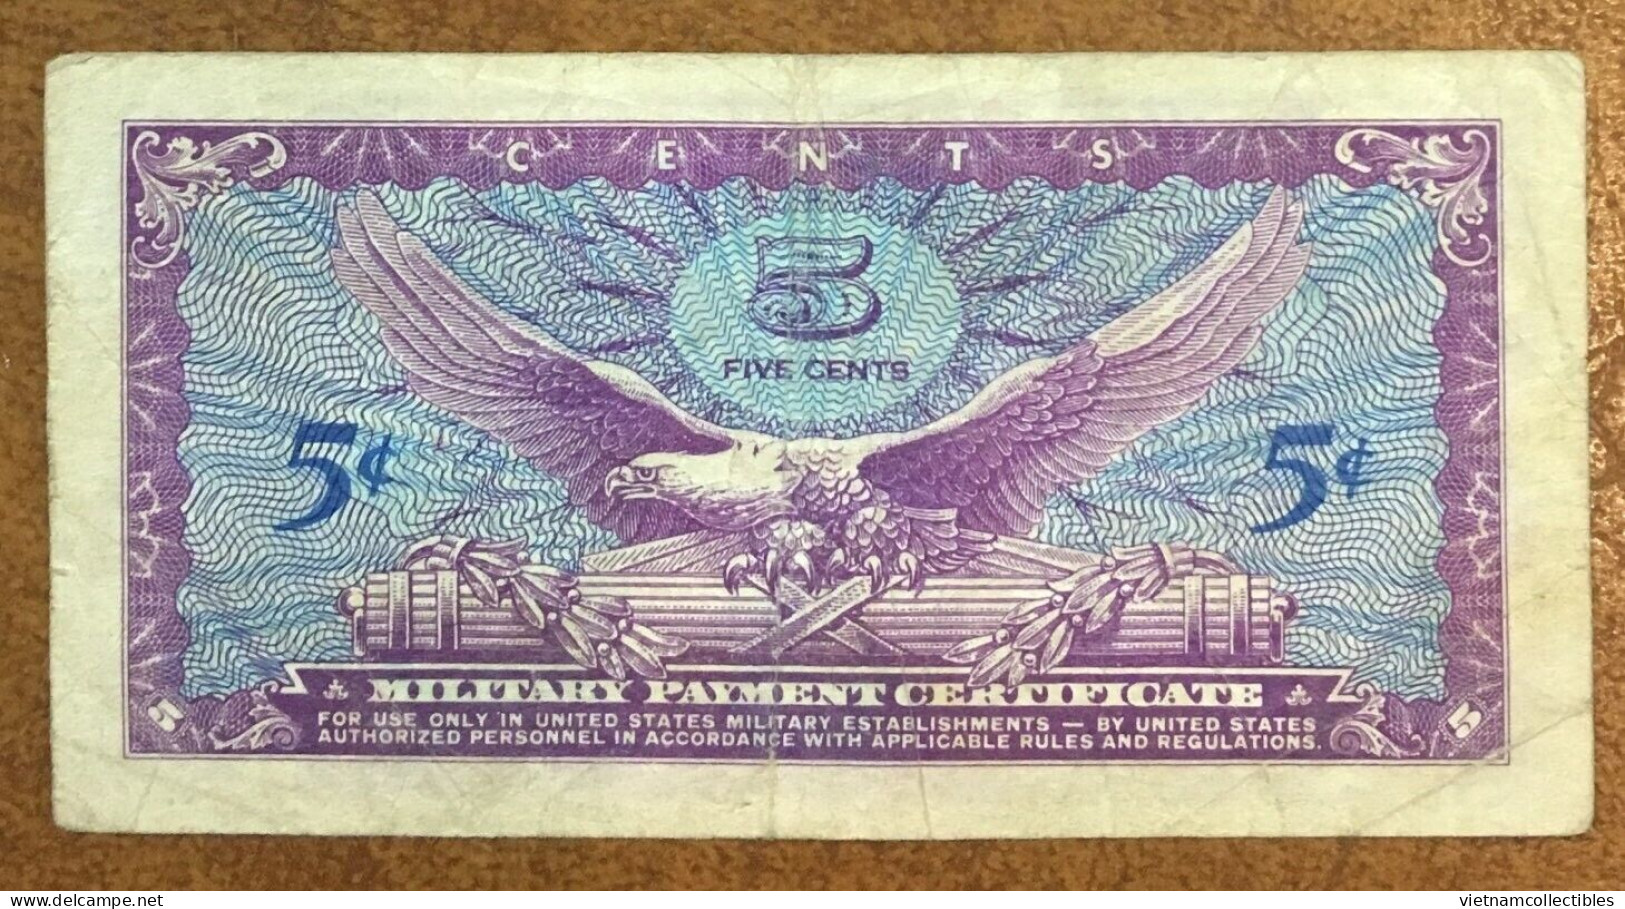 USA MPC 5 Cents Military Payment Series 641 VF Banknote Note 1964 Using In Vietnam Viet Nam - Plate # 1 / 2 Photos - 1965-1968 - Series 641